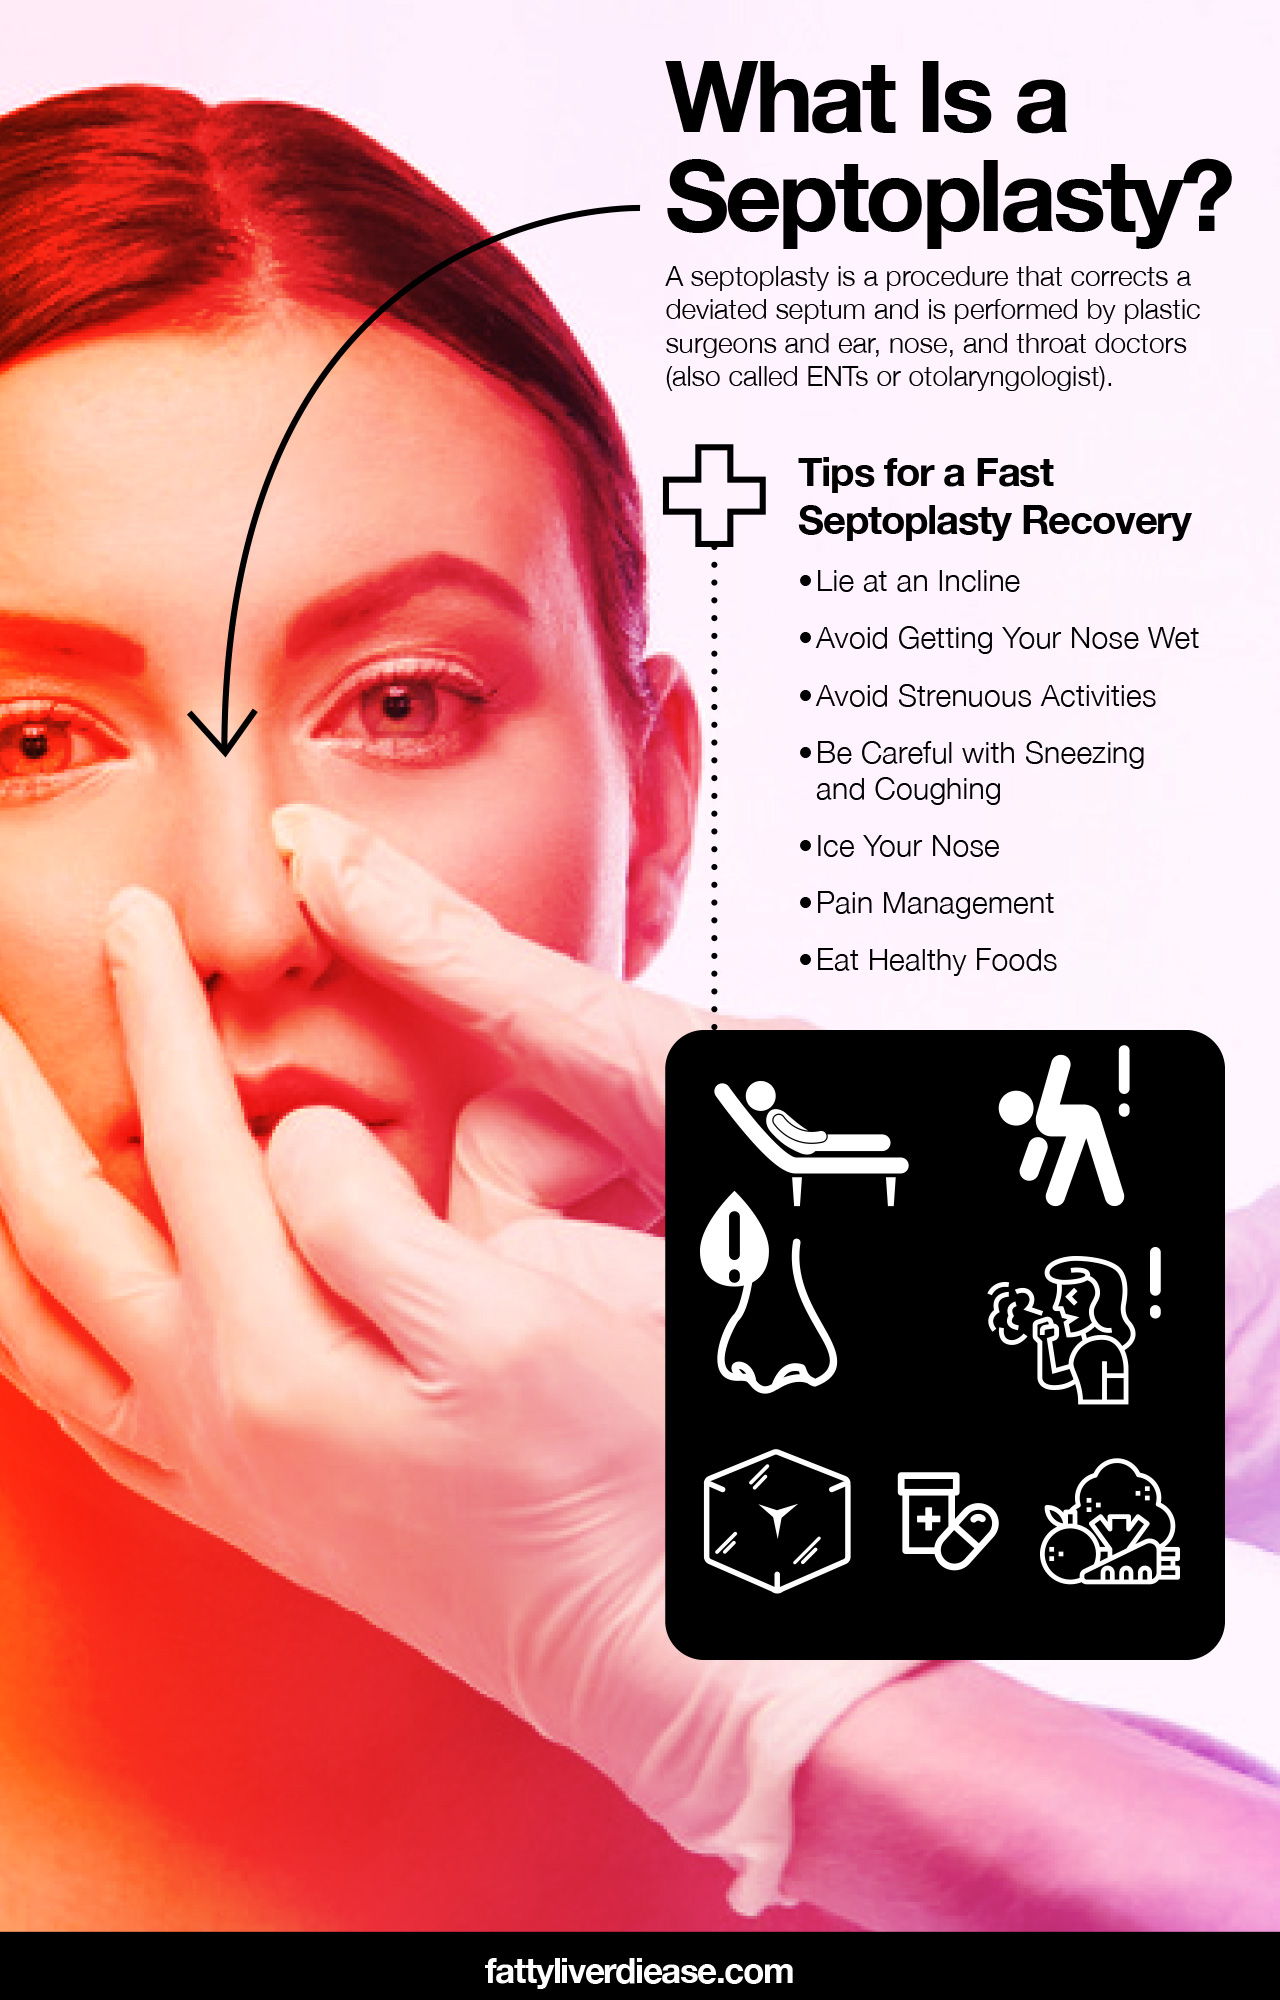 What Is a Septoplasty?